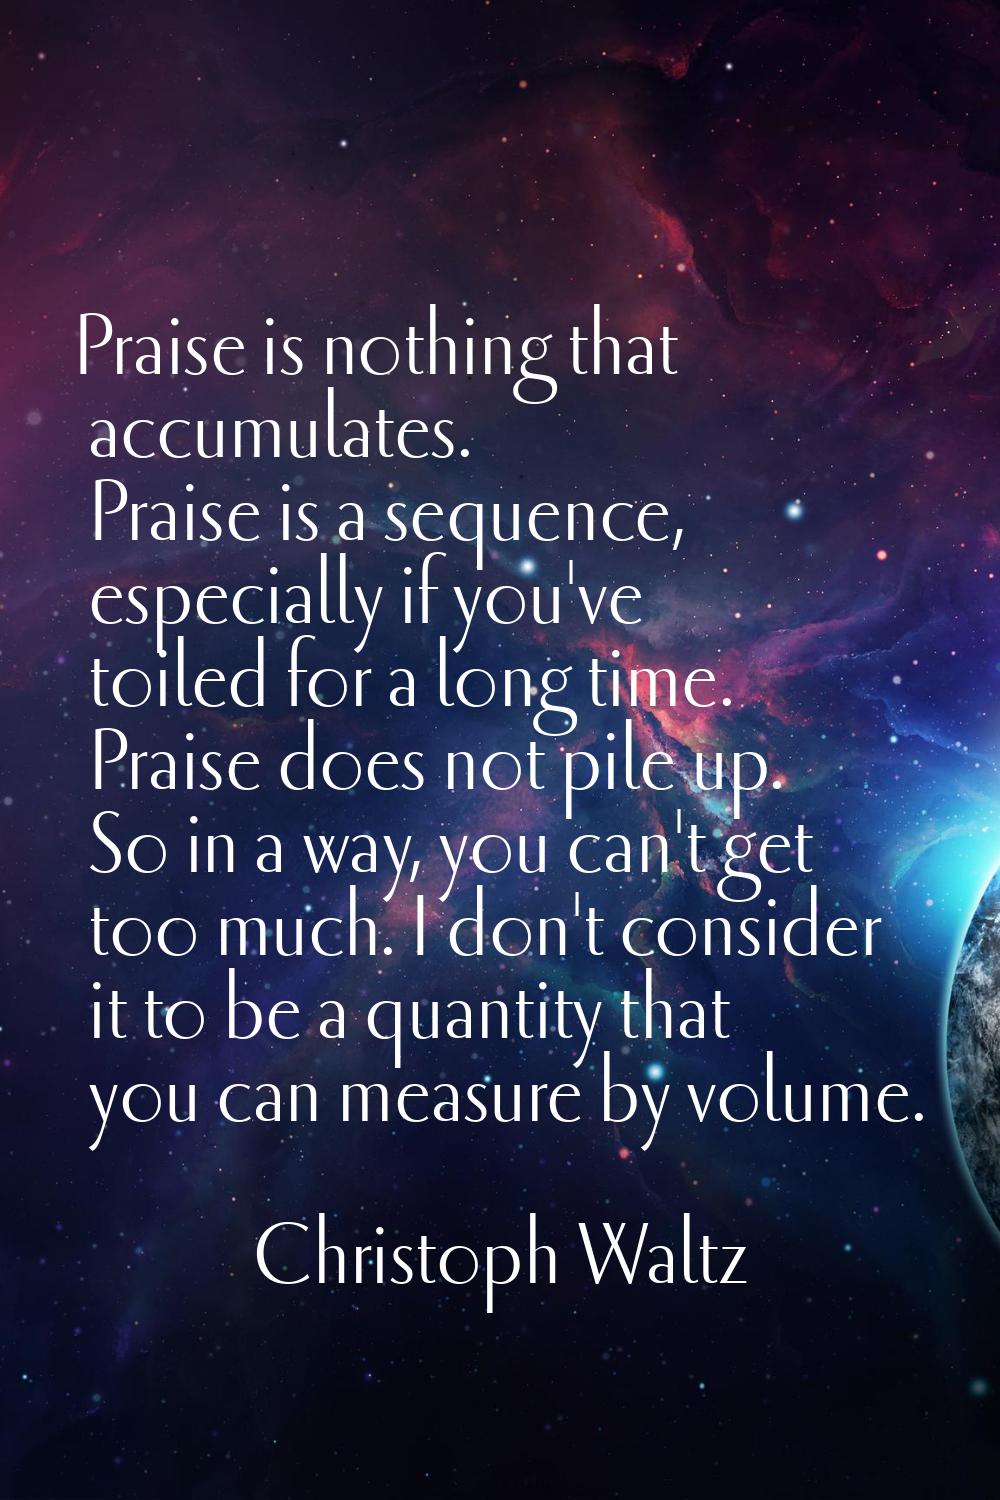 Praise is nothing that accumulates. Praise is a sequence, especially if you've toiled for a long ti